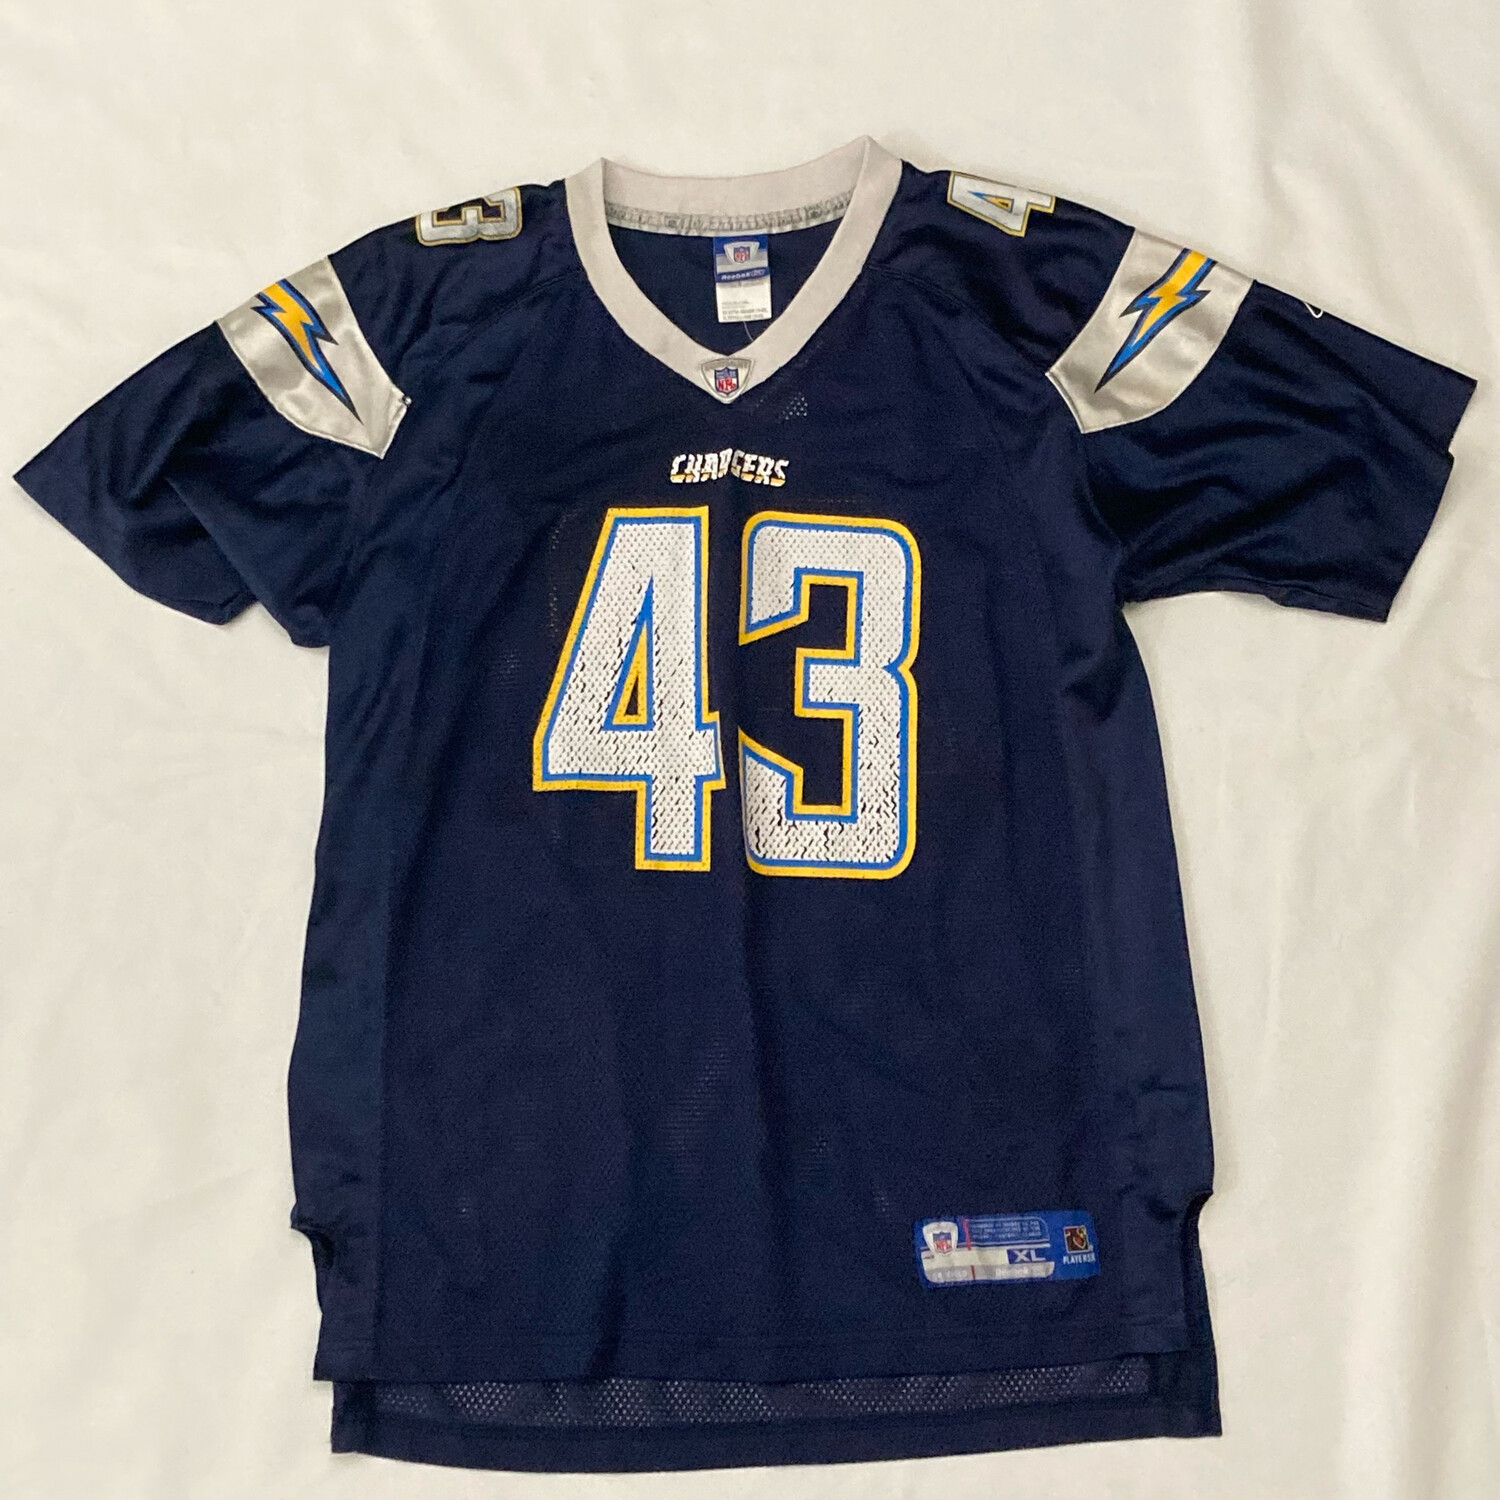 Chargers 43 Jersey